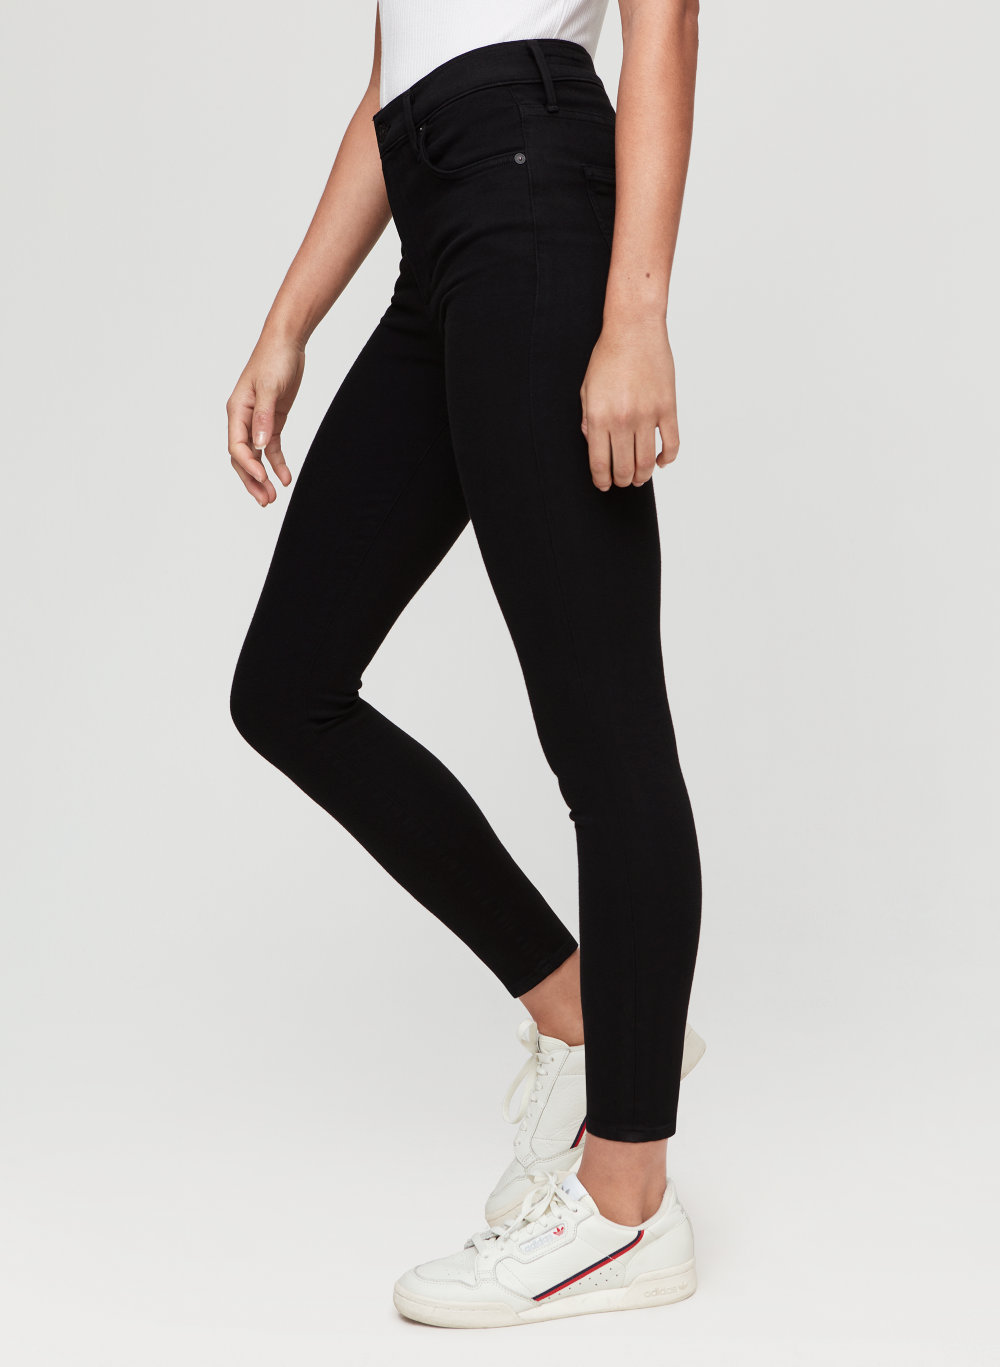 citizens of humanity rocket crop high rise skinny black